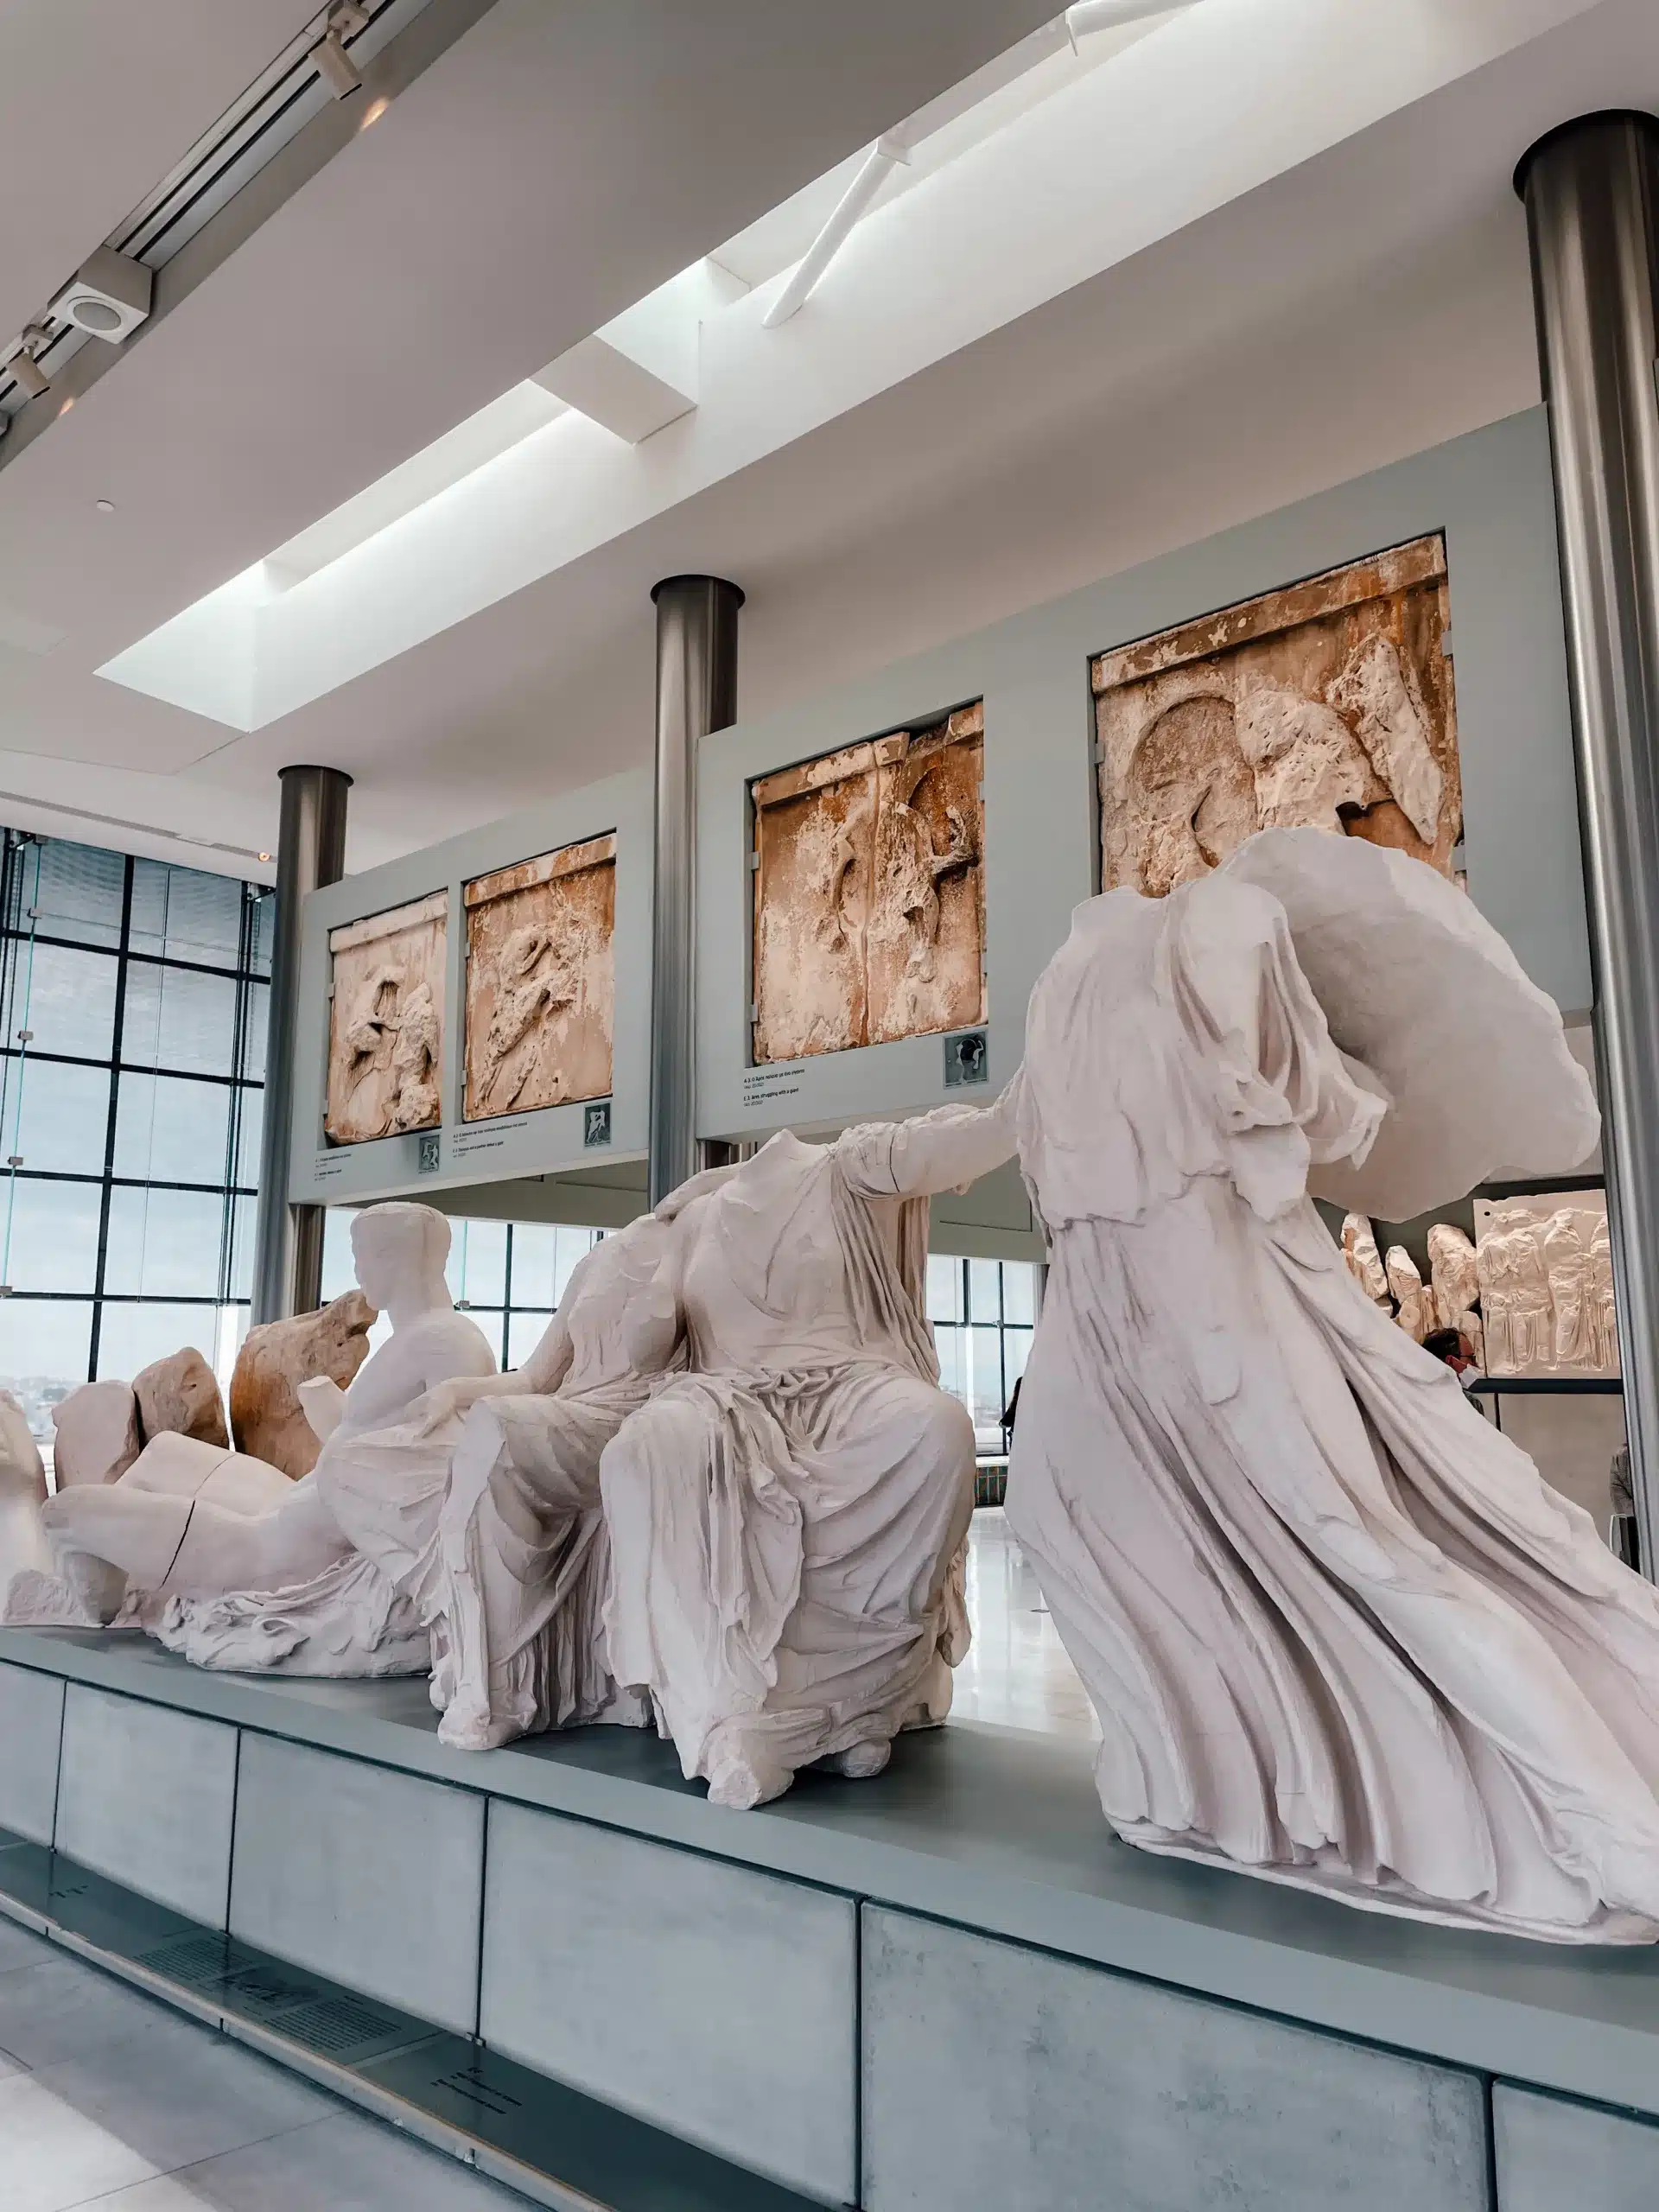 Several stone statues, original relics from the Acropolis, sit inside the Acropolis Museum in Athens 